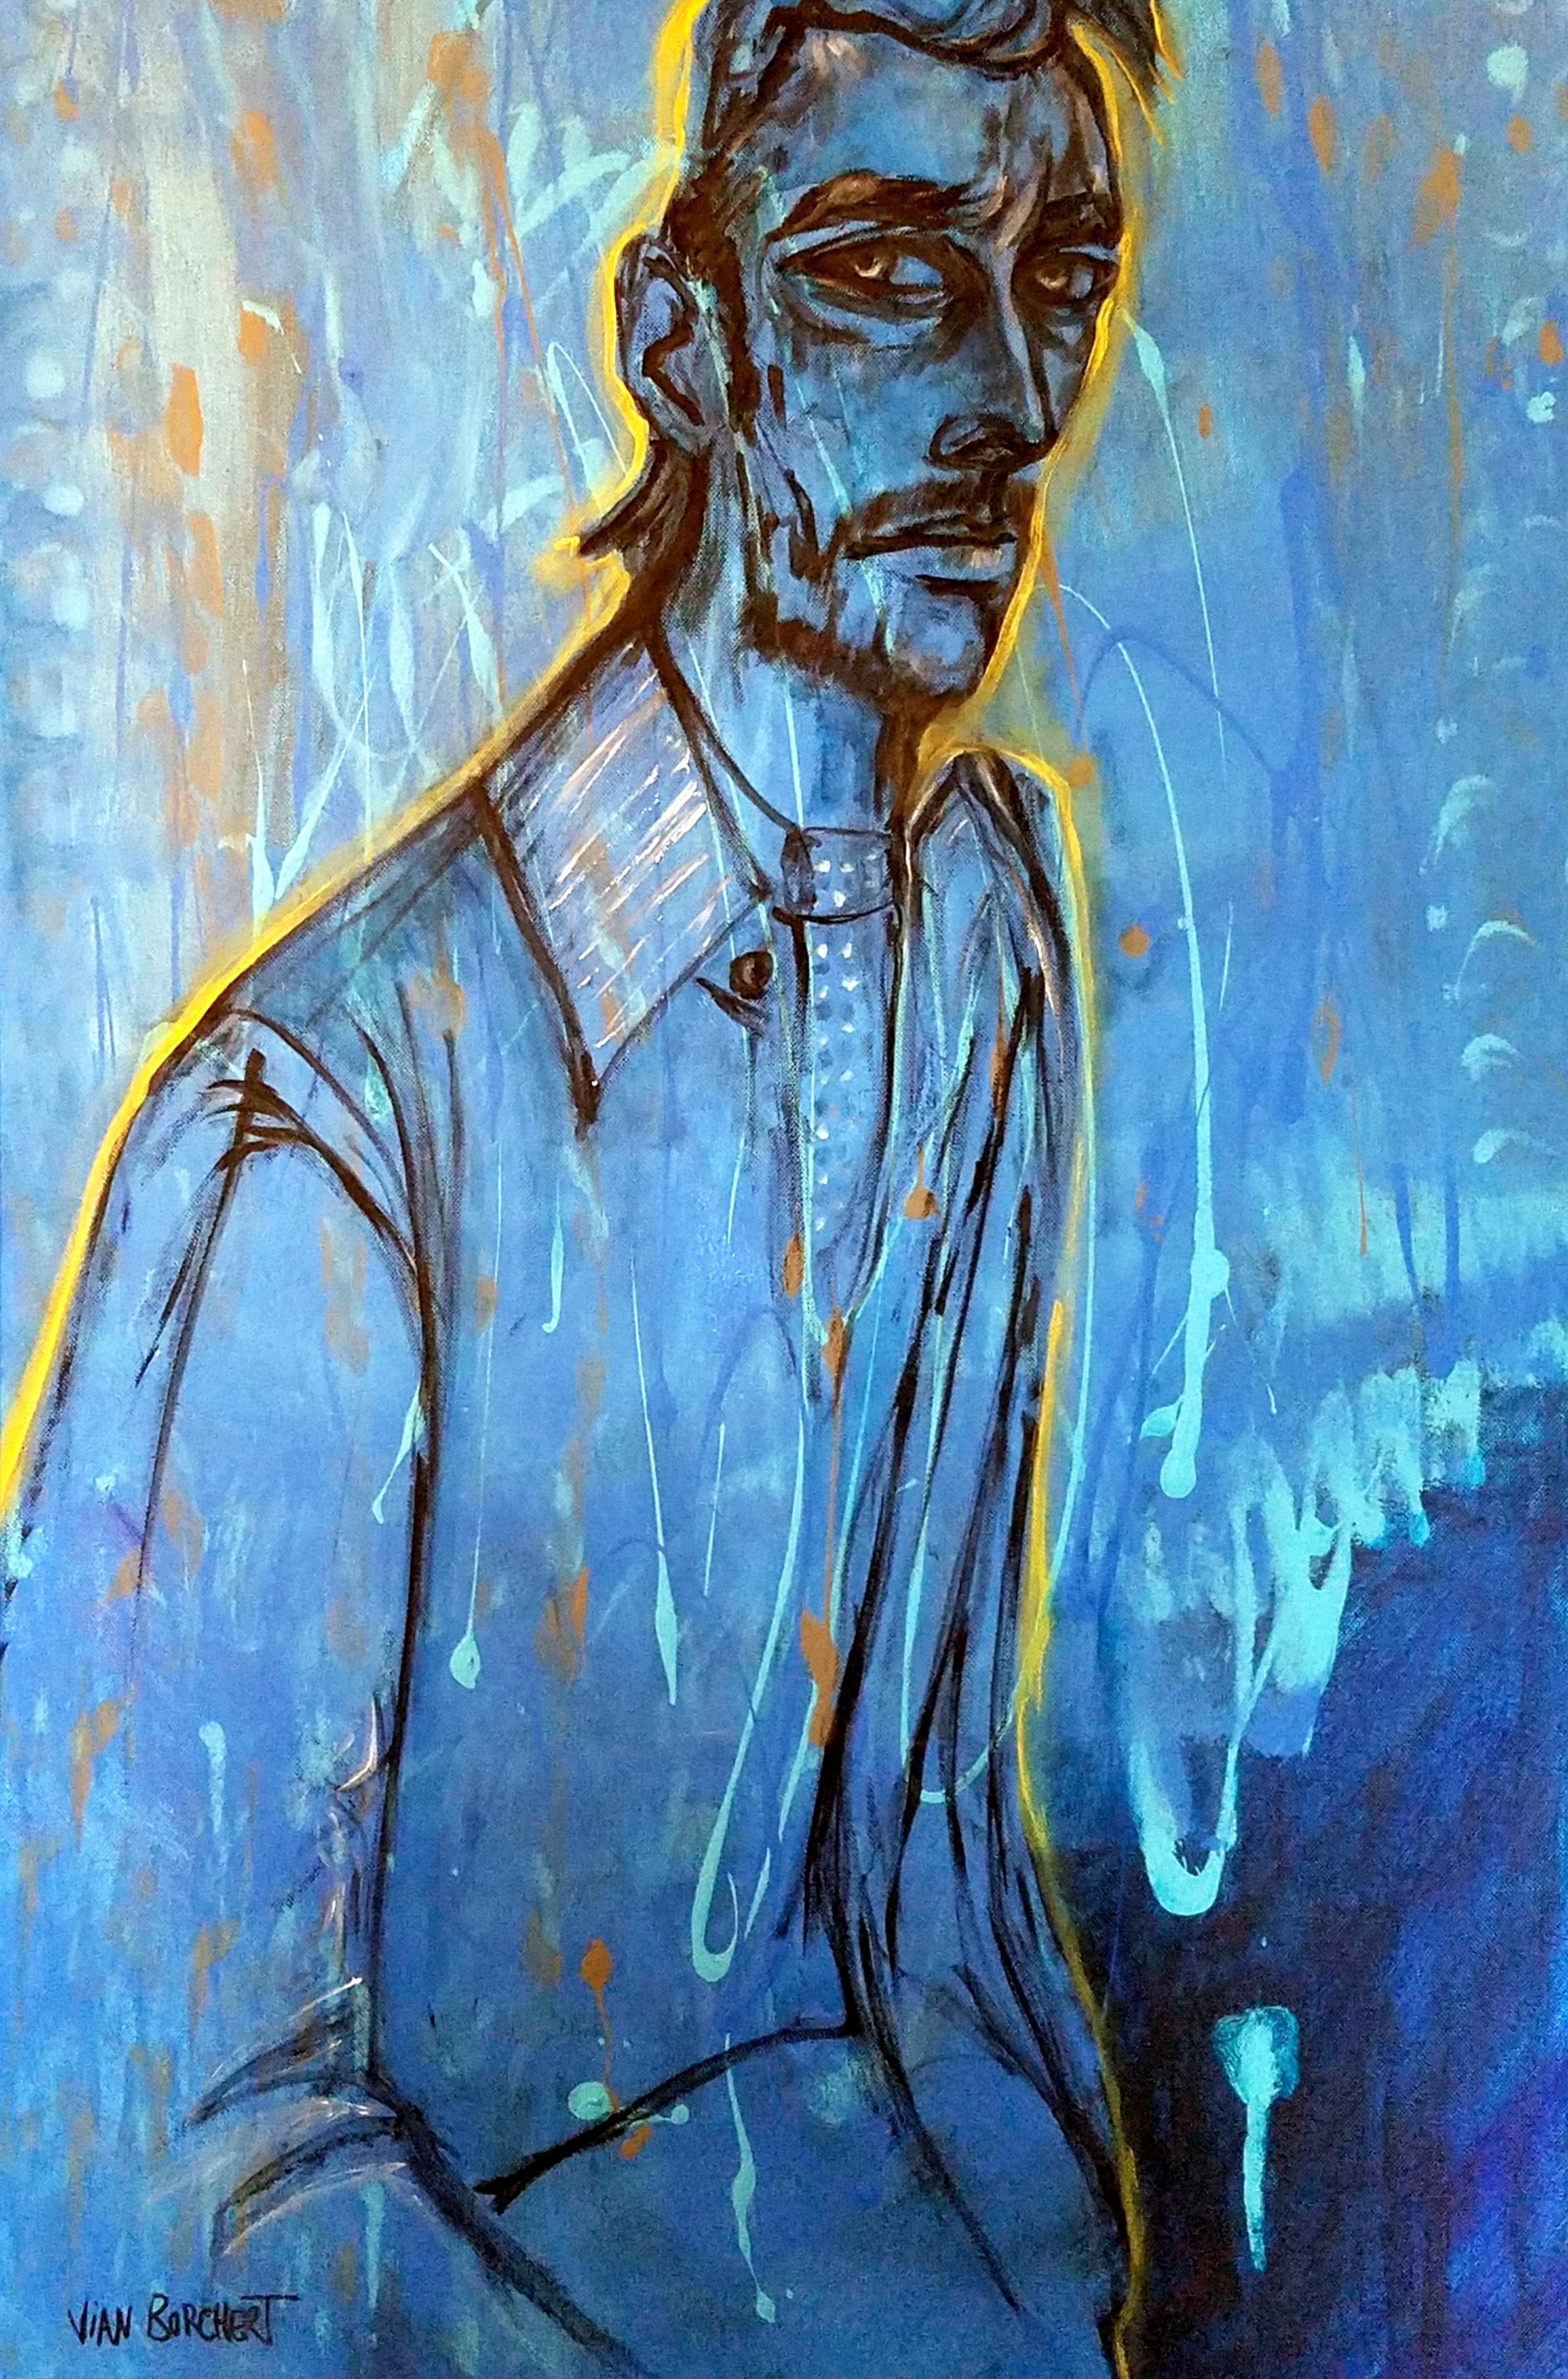 Vian Borchert Abstract Painting - "Man Of The Hour"